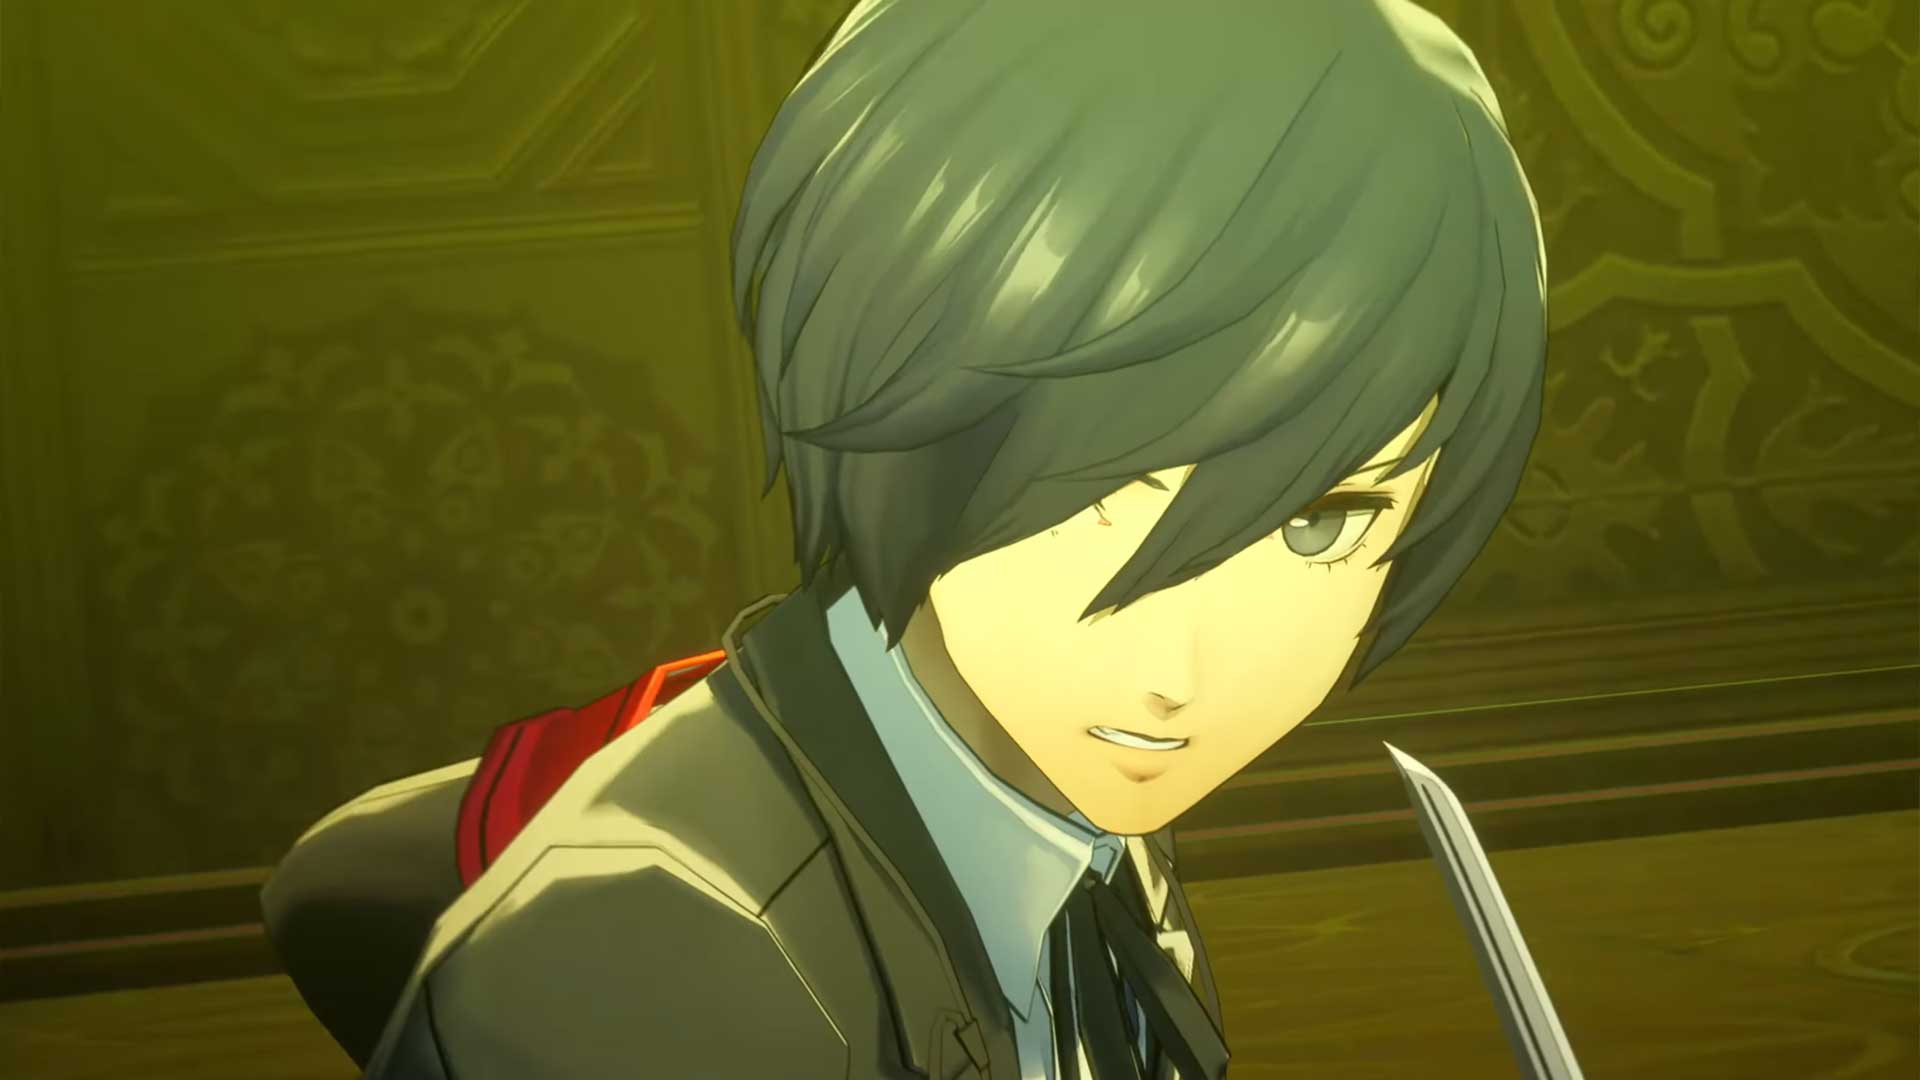 Persona 3 Reload will also have versions for PS5, PS4